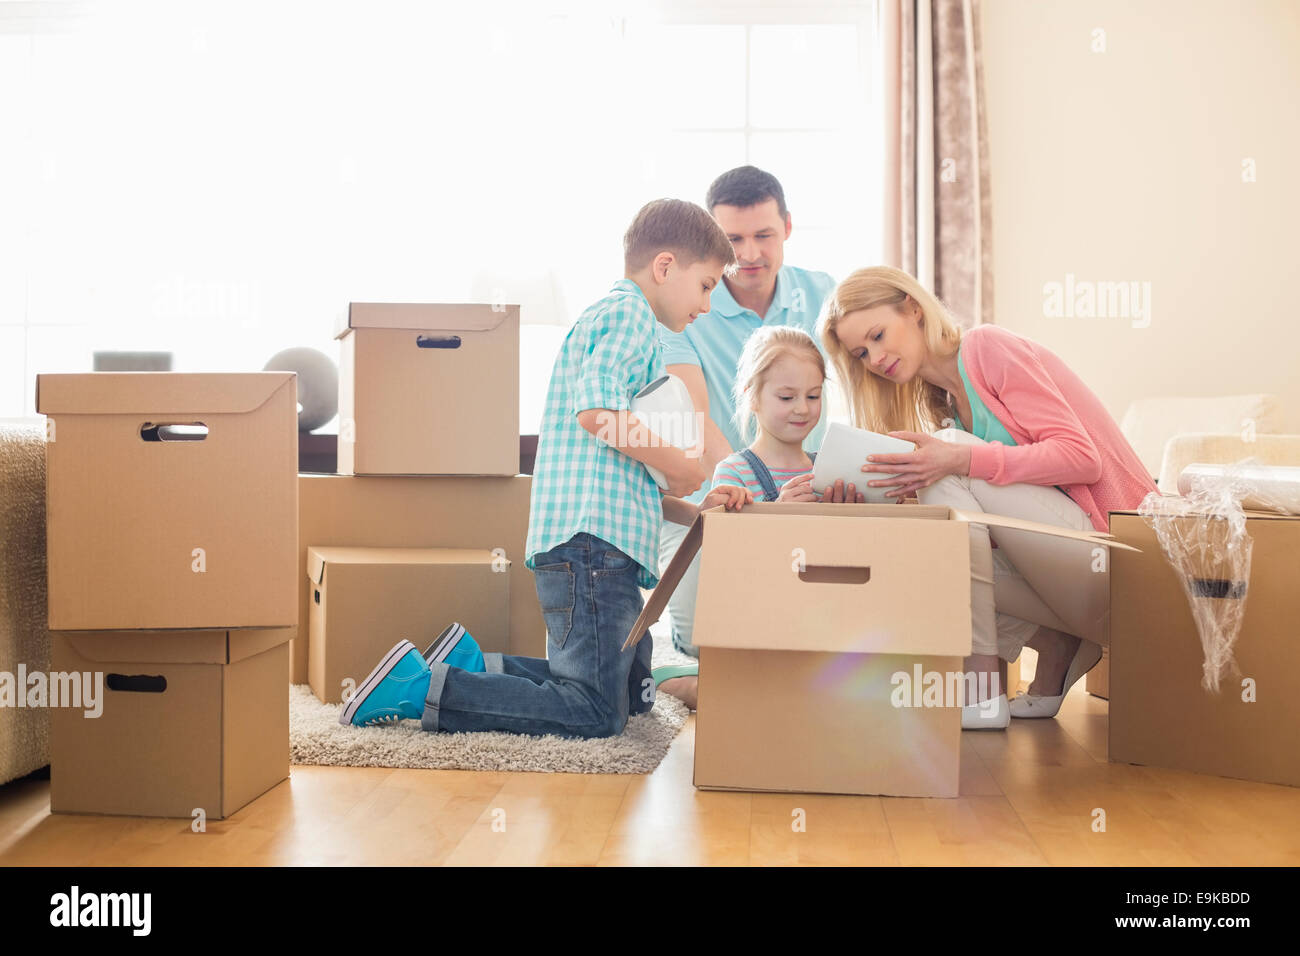 Family unpacking cardboard boxes at new home Stock Photo